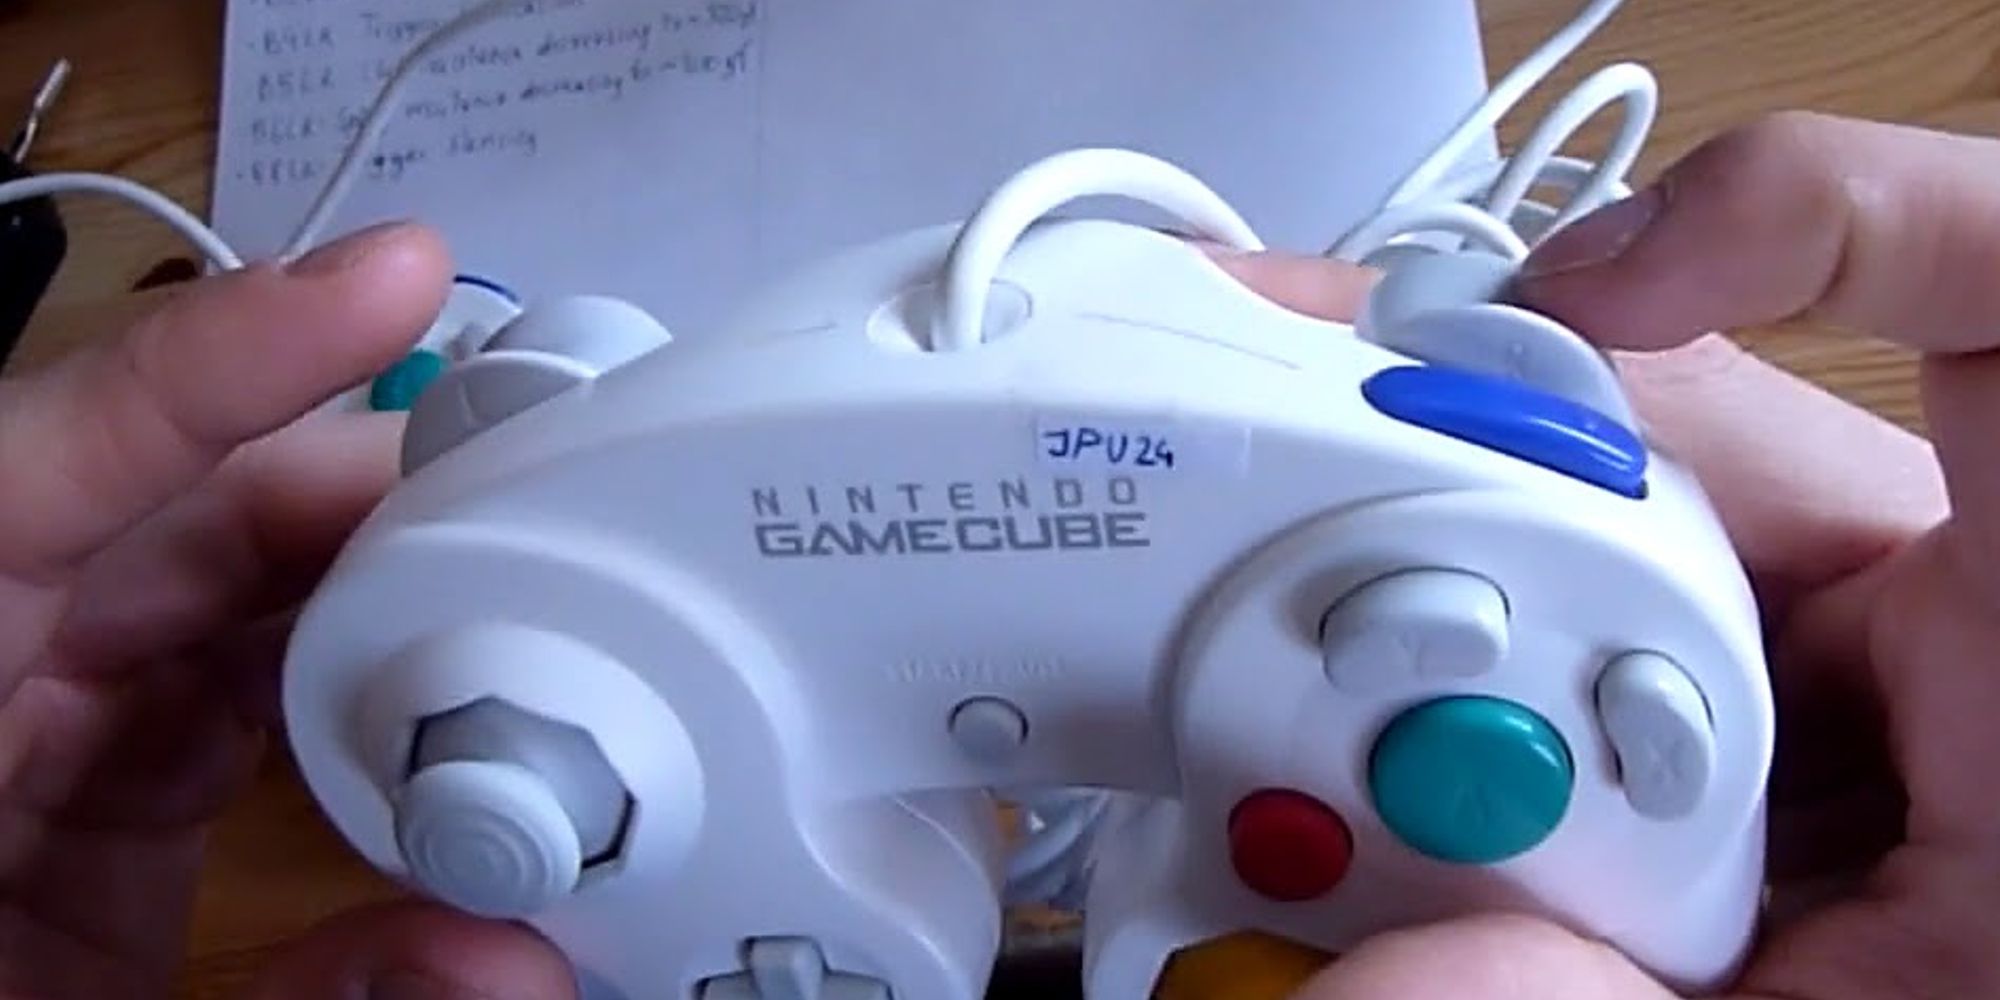 A player showcasing the top of a customized GameCube controller